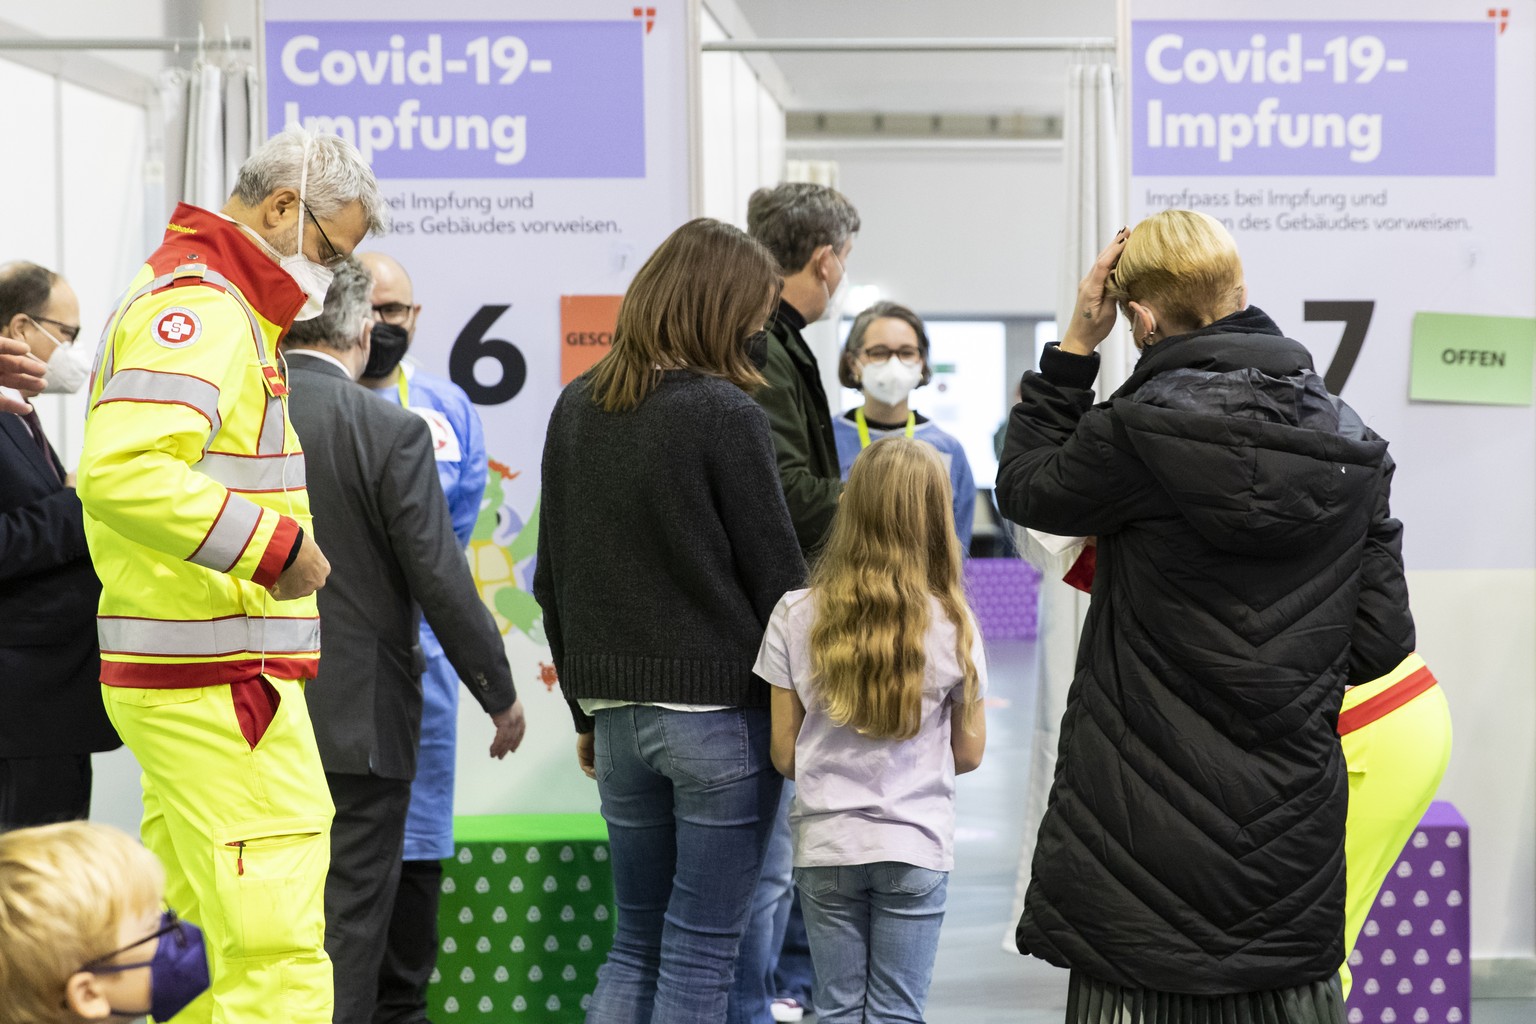 Children wait with their parents to receive the Pfizer vaccine against the COVID-19 disease. The official vaccination for children between the age of 5 and 12 years start today in Vienna, Austria, Mon ...